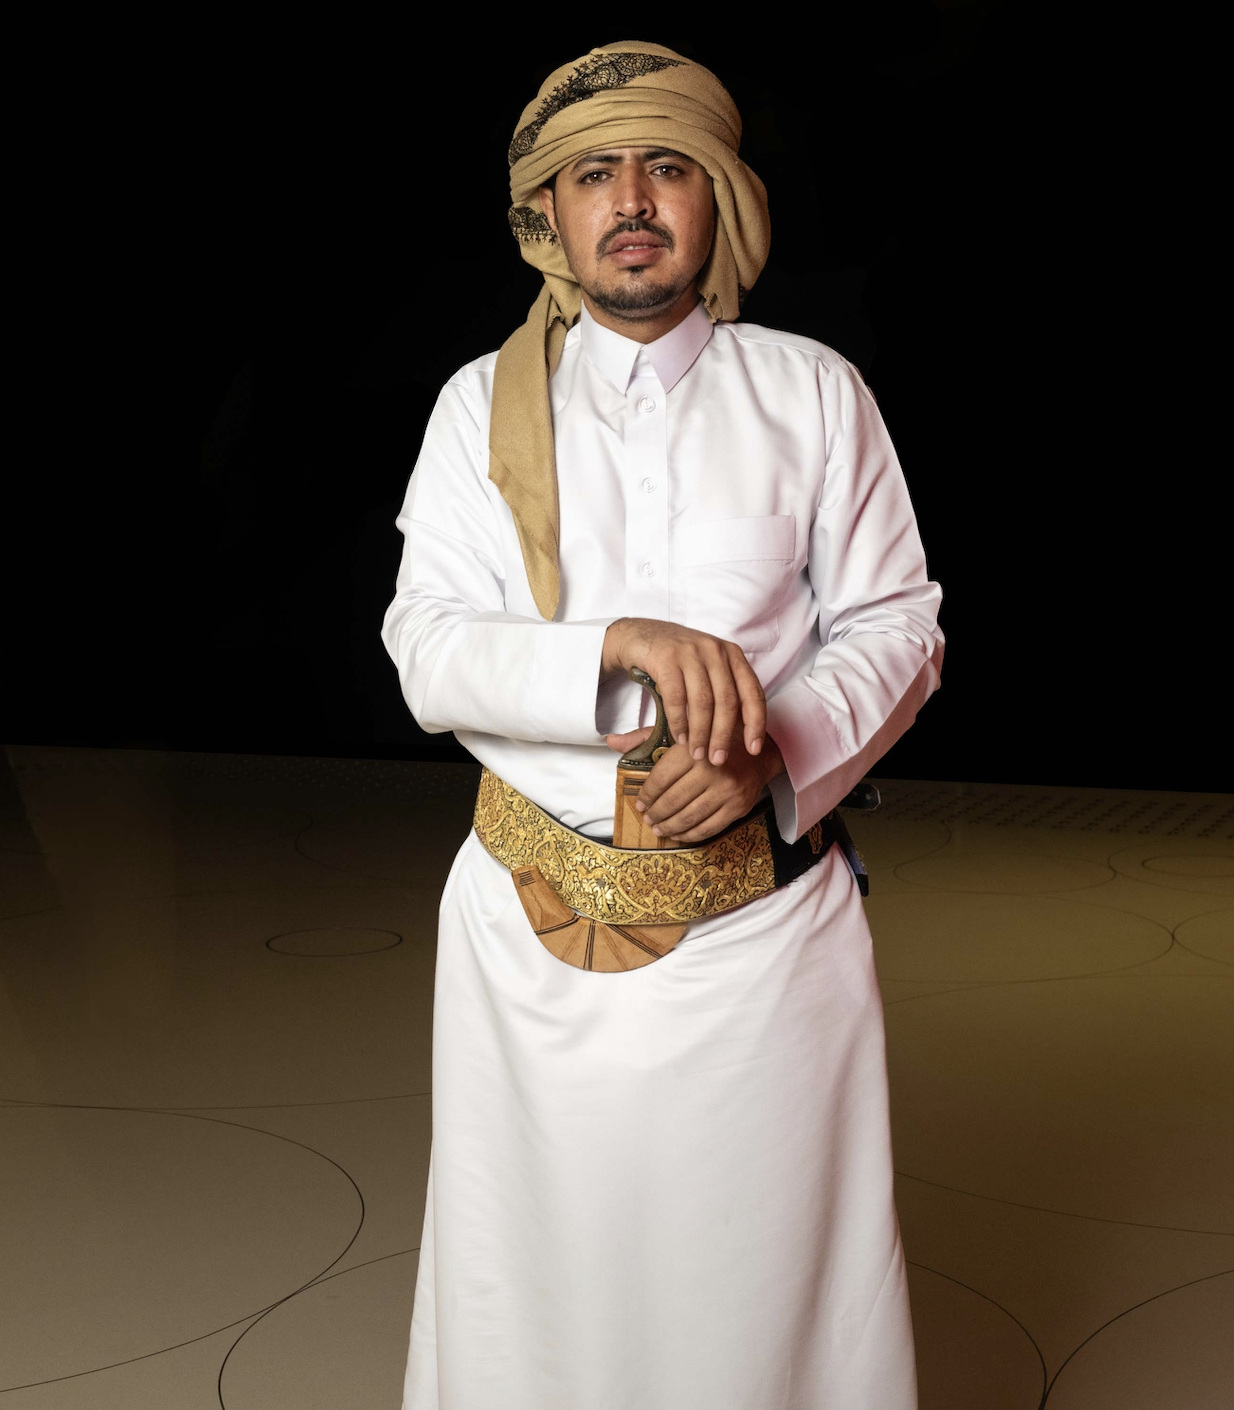 A man models a traditional Yemeni outfit of a long white robe, cloth tied around the head and a Yemeni dagger at his waist.